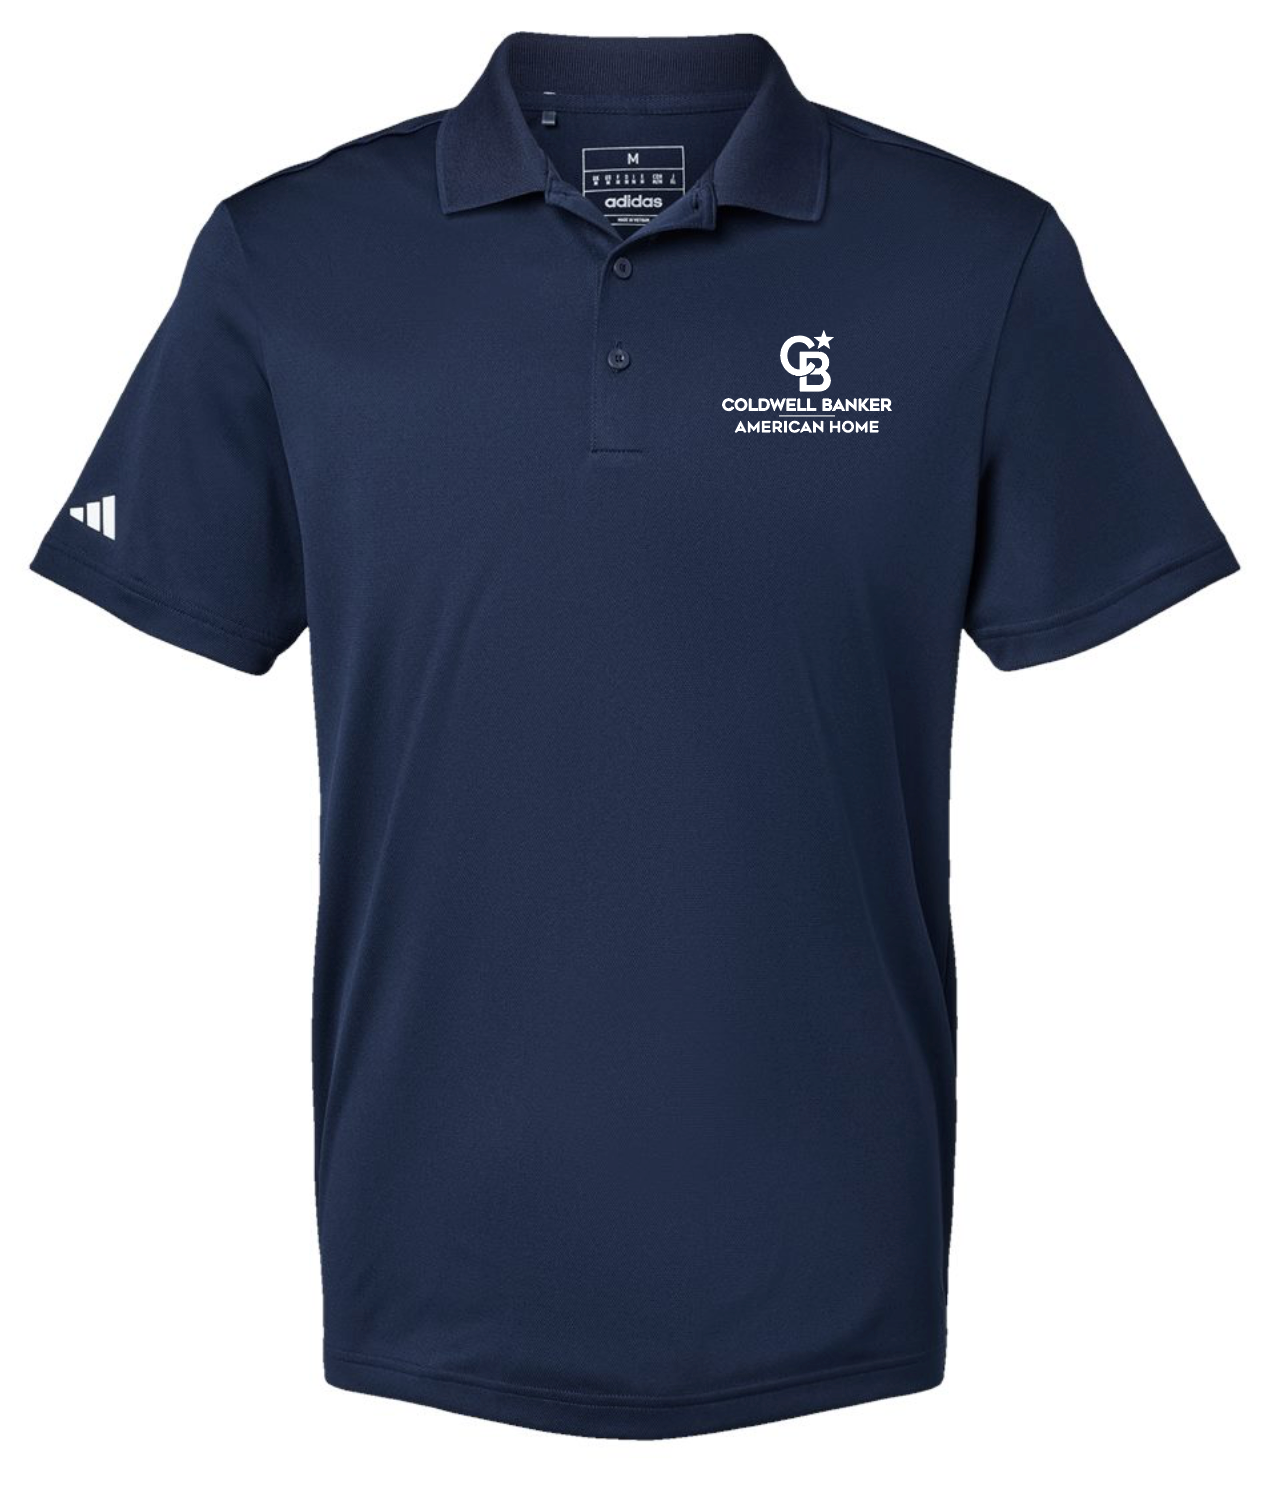 Coldwell Banker Adidas Sport Polo